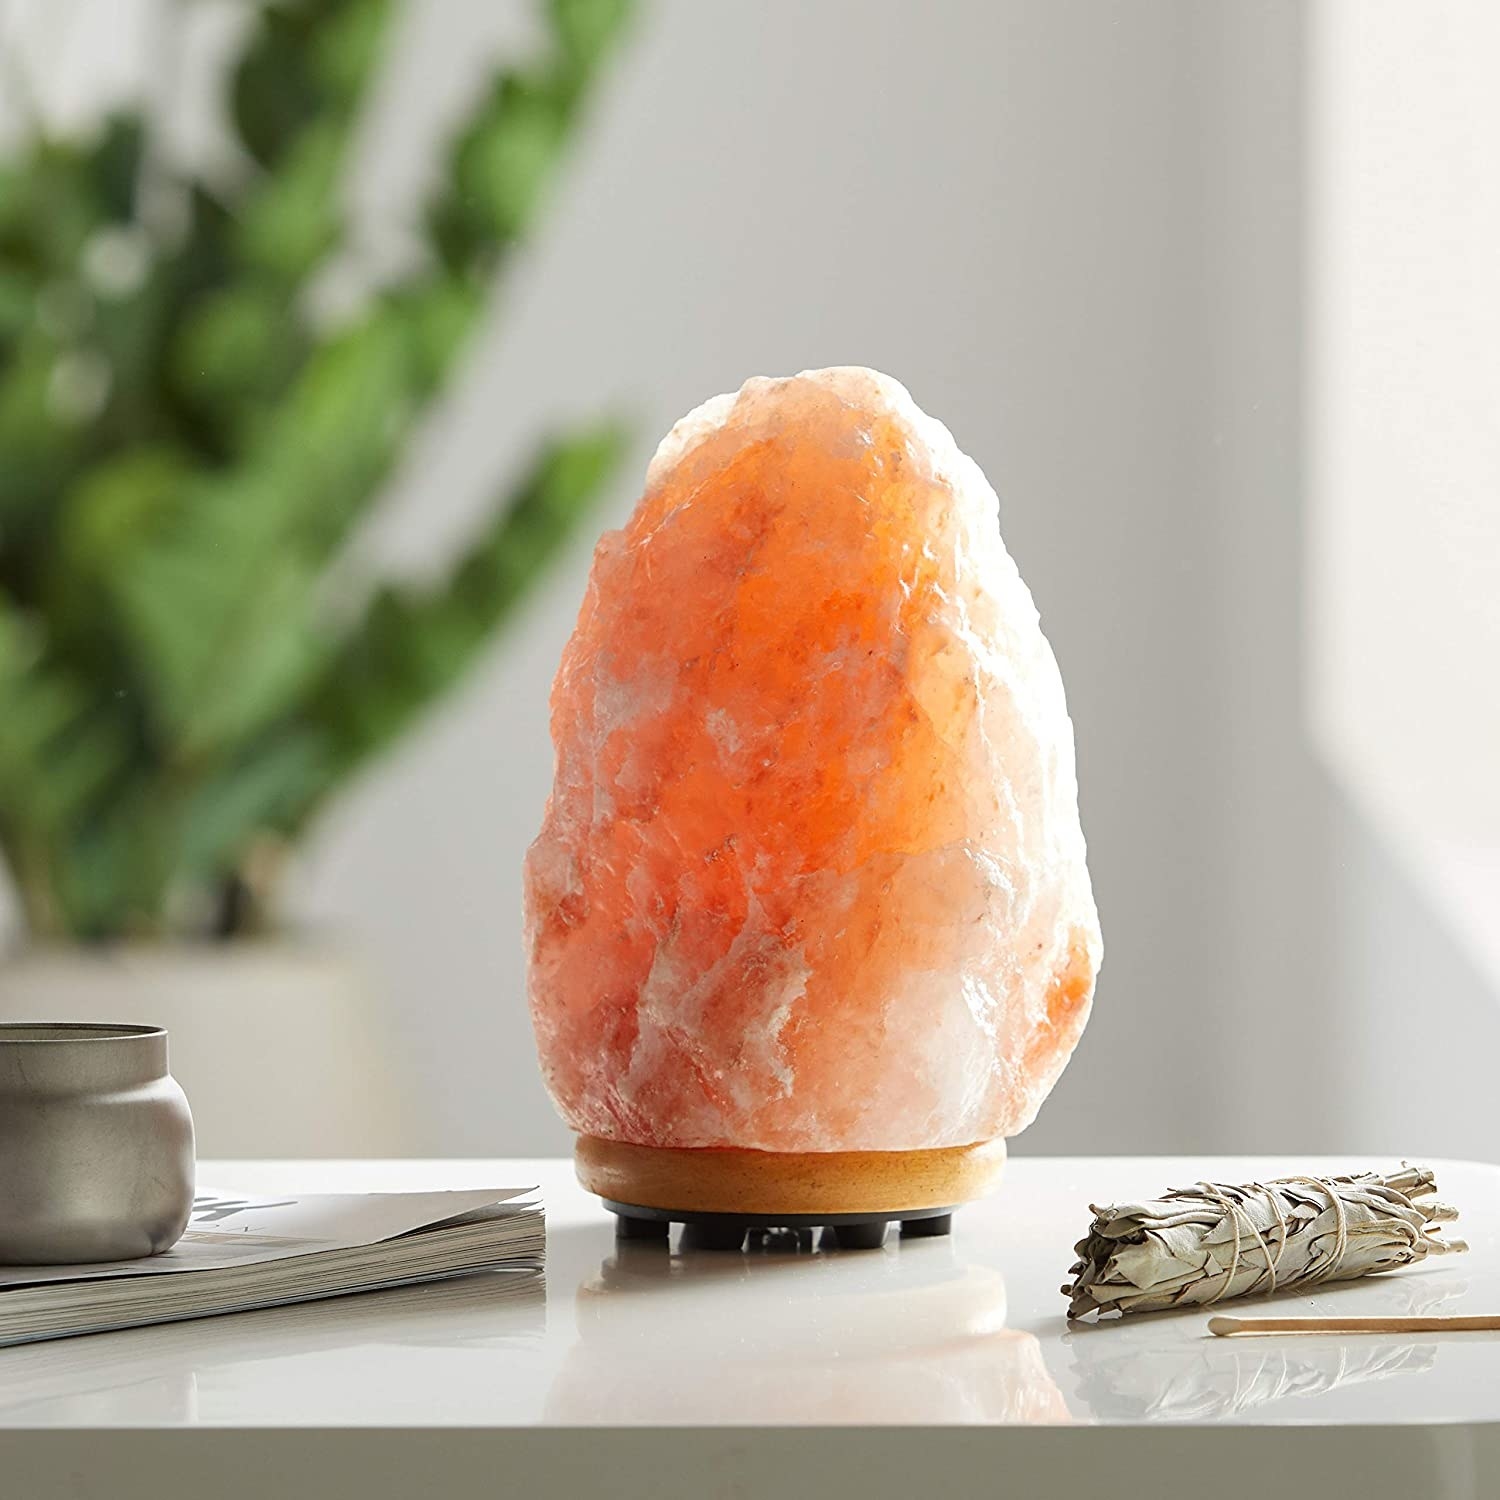 A Himalayan salt lamp in a pinkish hue placed on a table